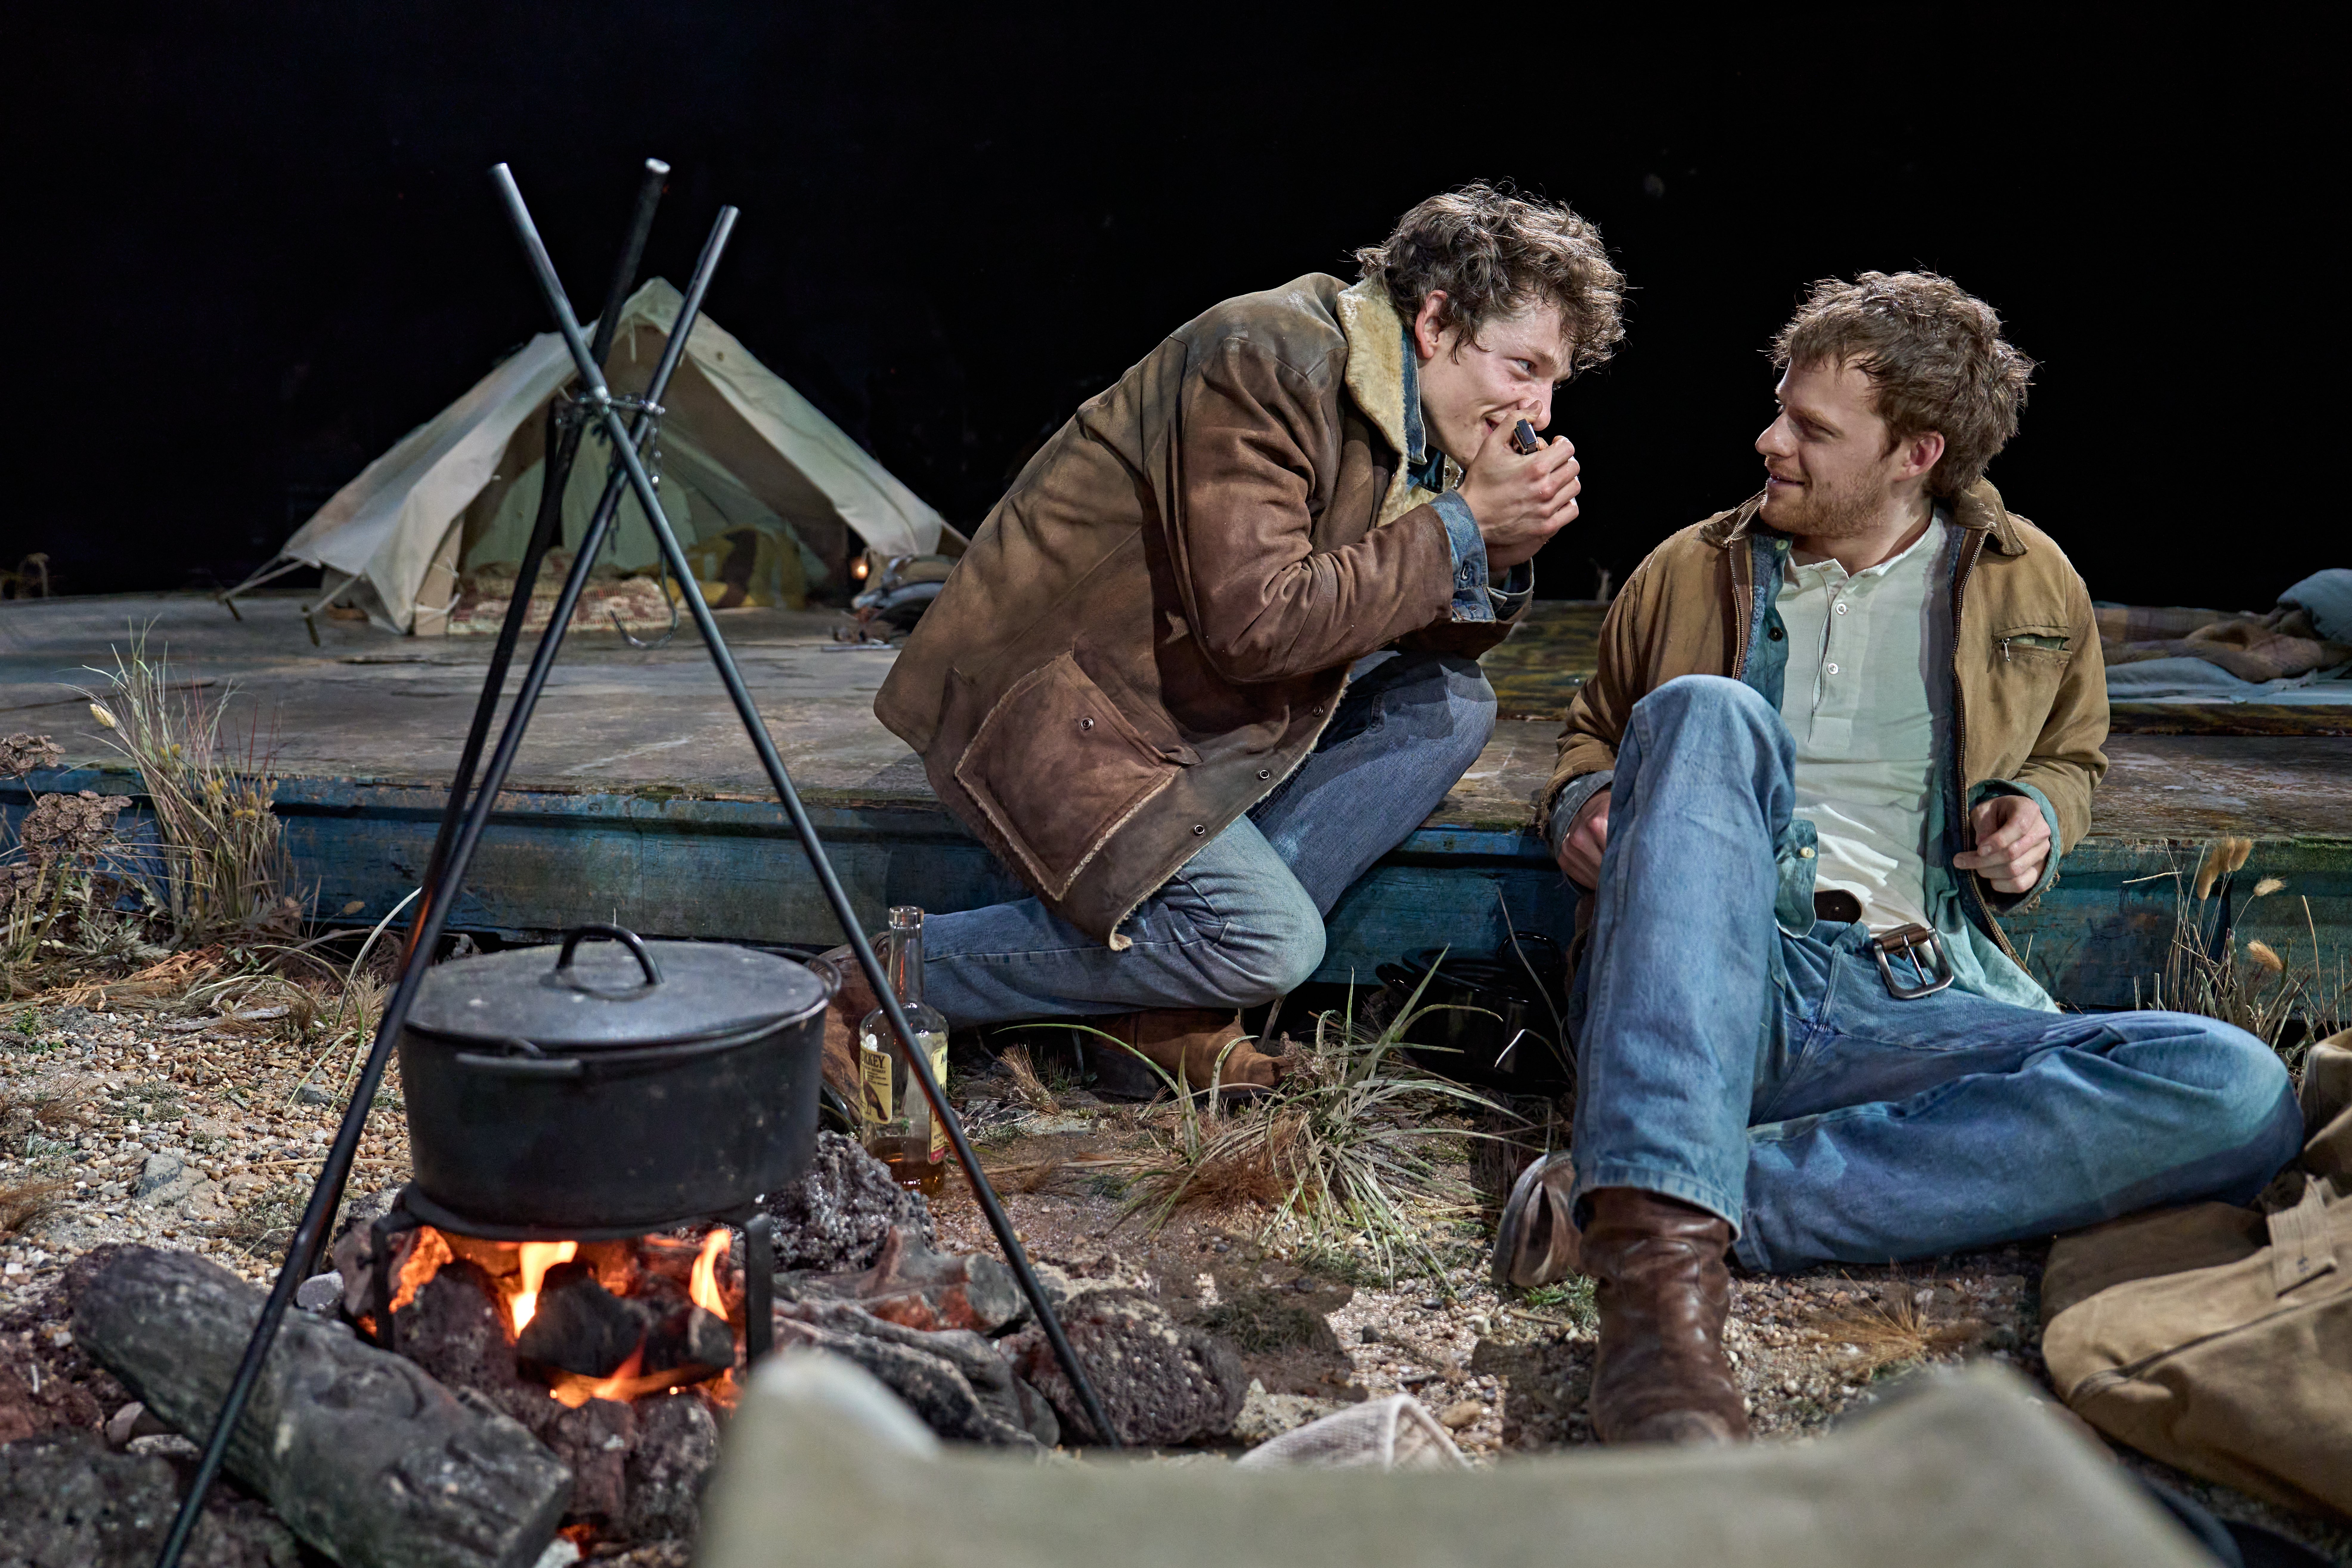 Faist (left) and Hedges in ‘Brokeback Mountain'